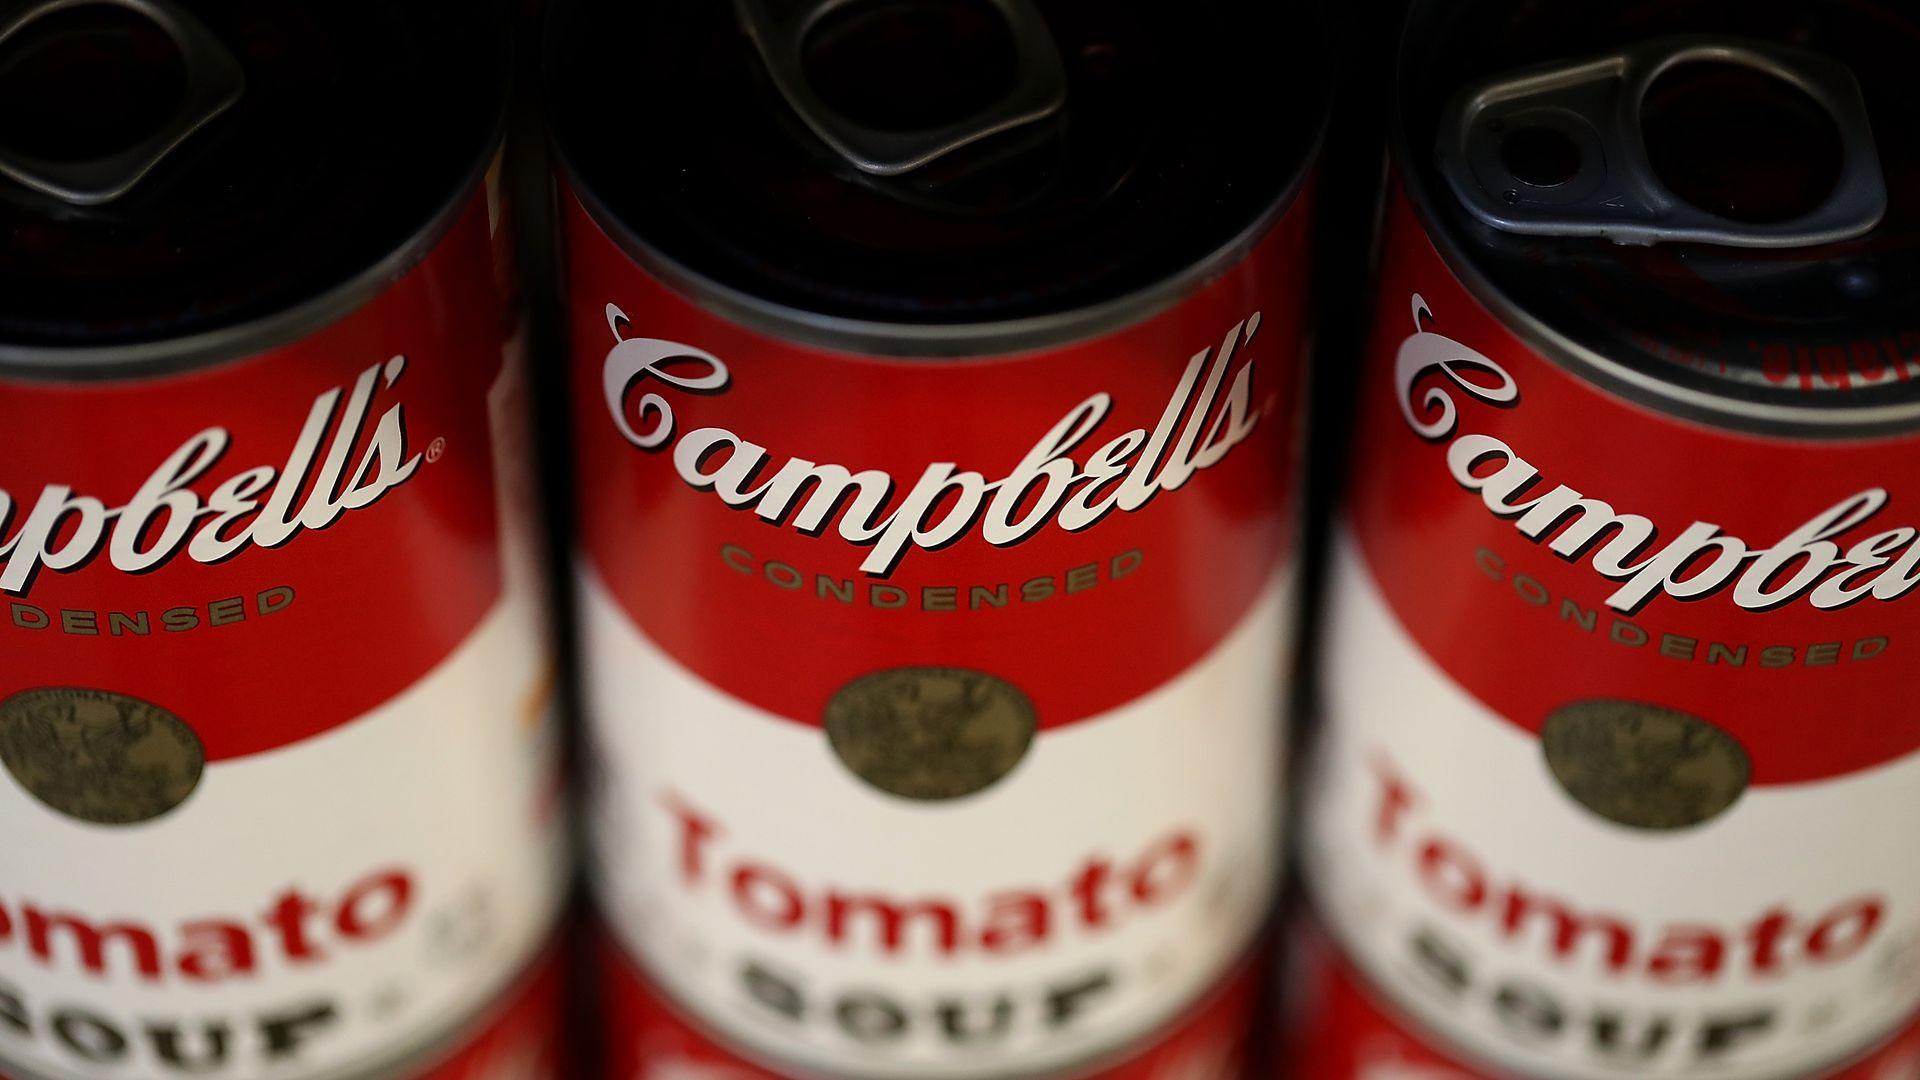 Campbell's Soup is under pressure to sell the company